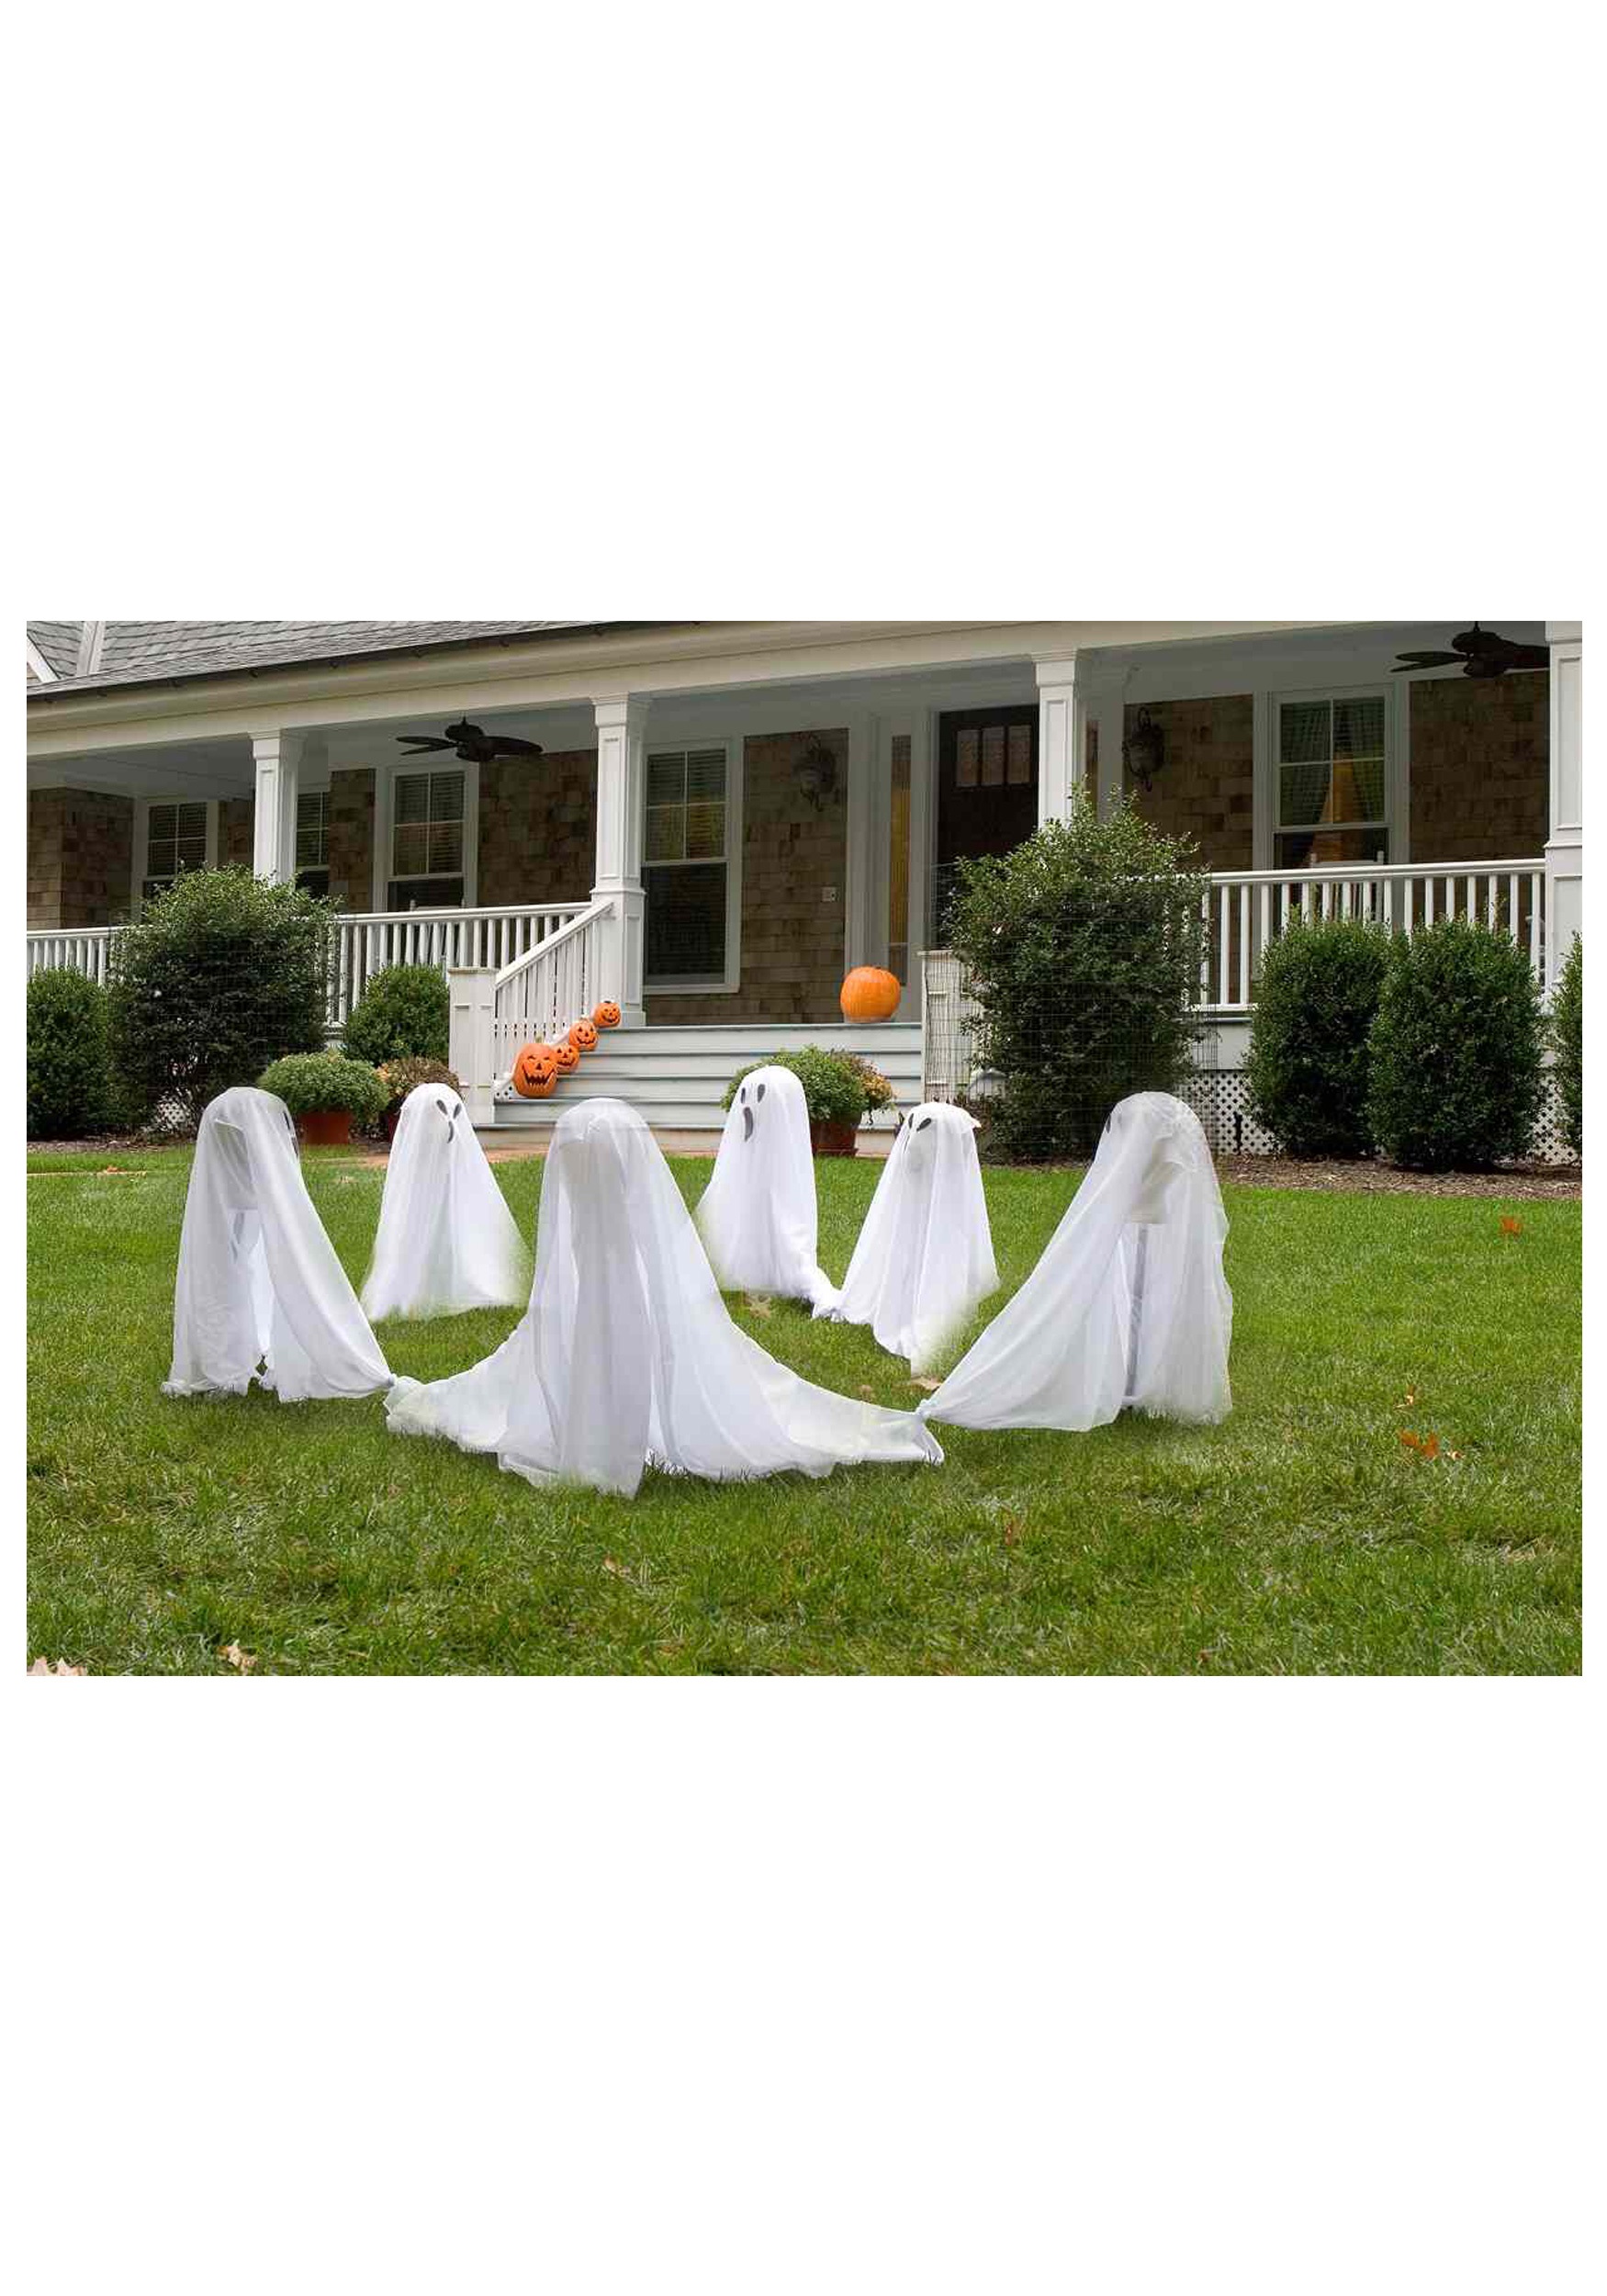 Set of 3 Ghostly Lawn Decoration